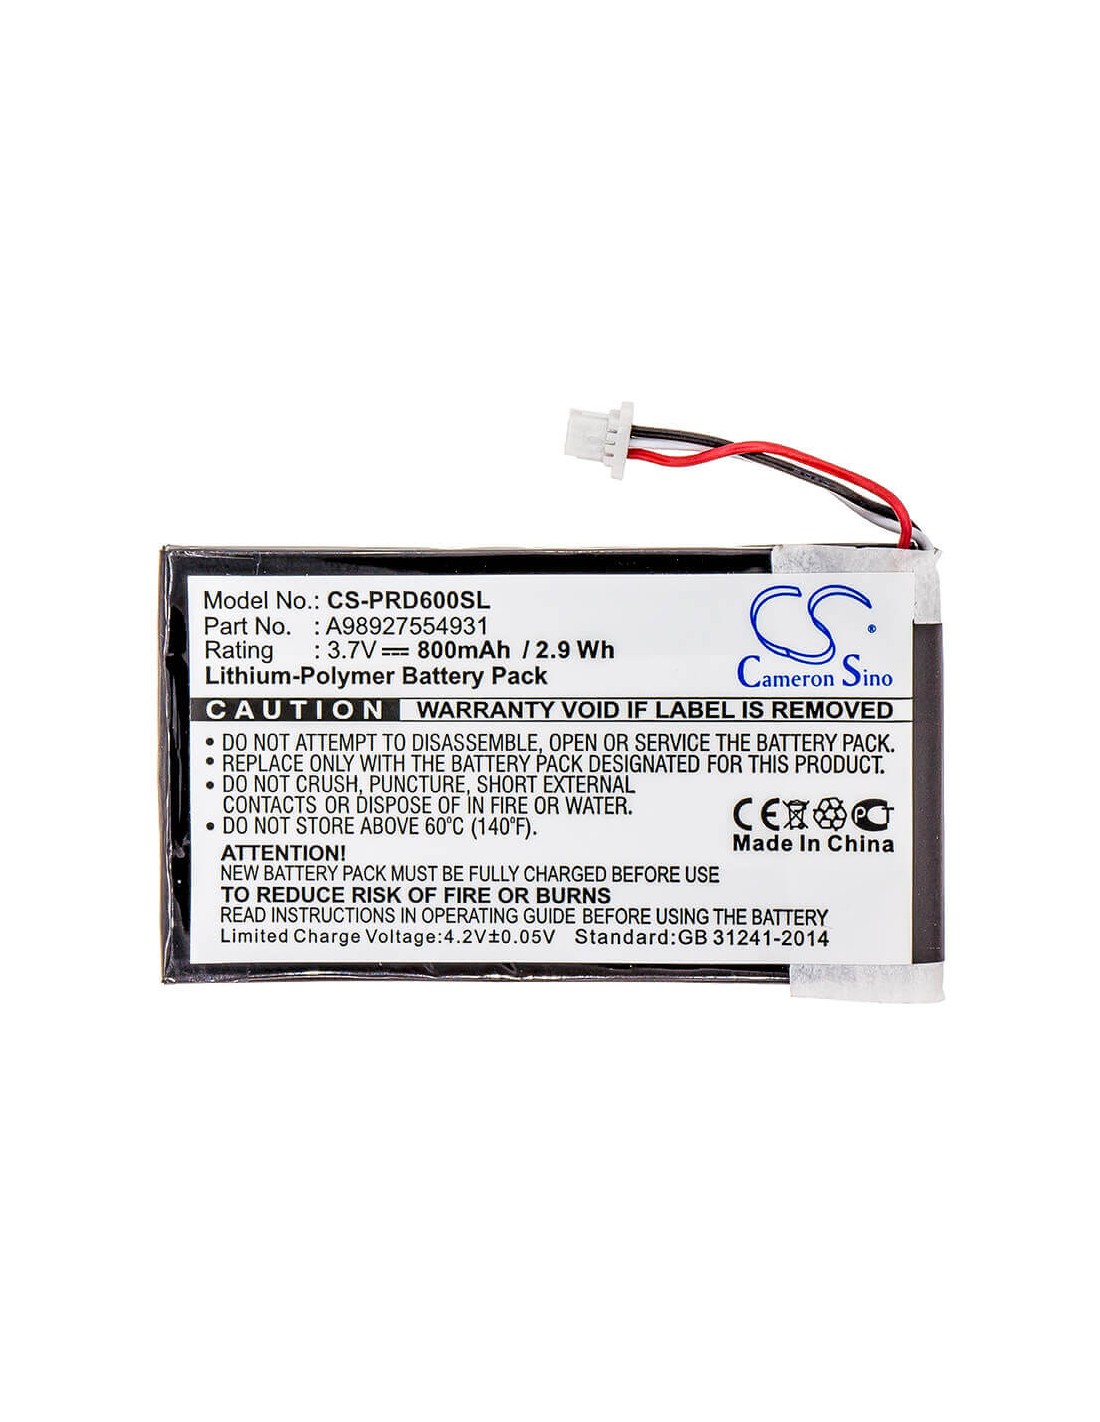 SY6 Cameron Sino Rechargeble Battery for Sony LIS1476MHPPC 